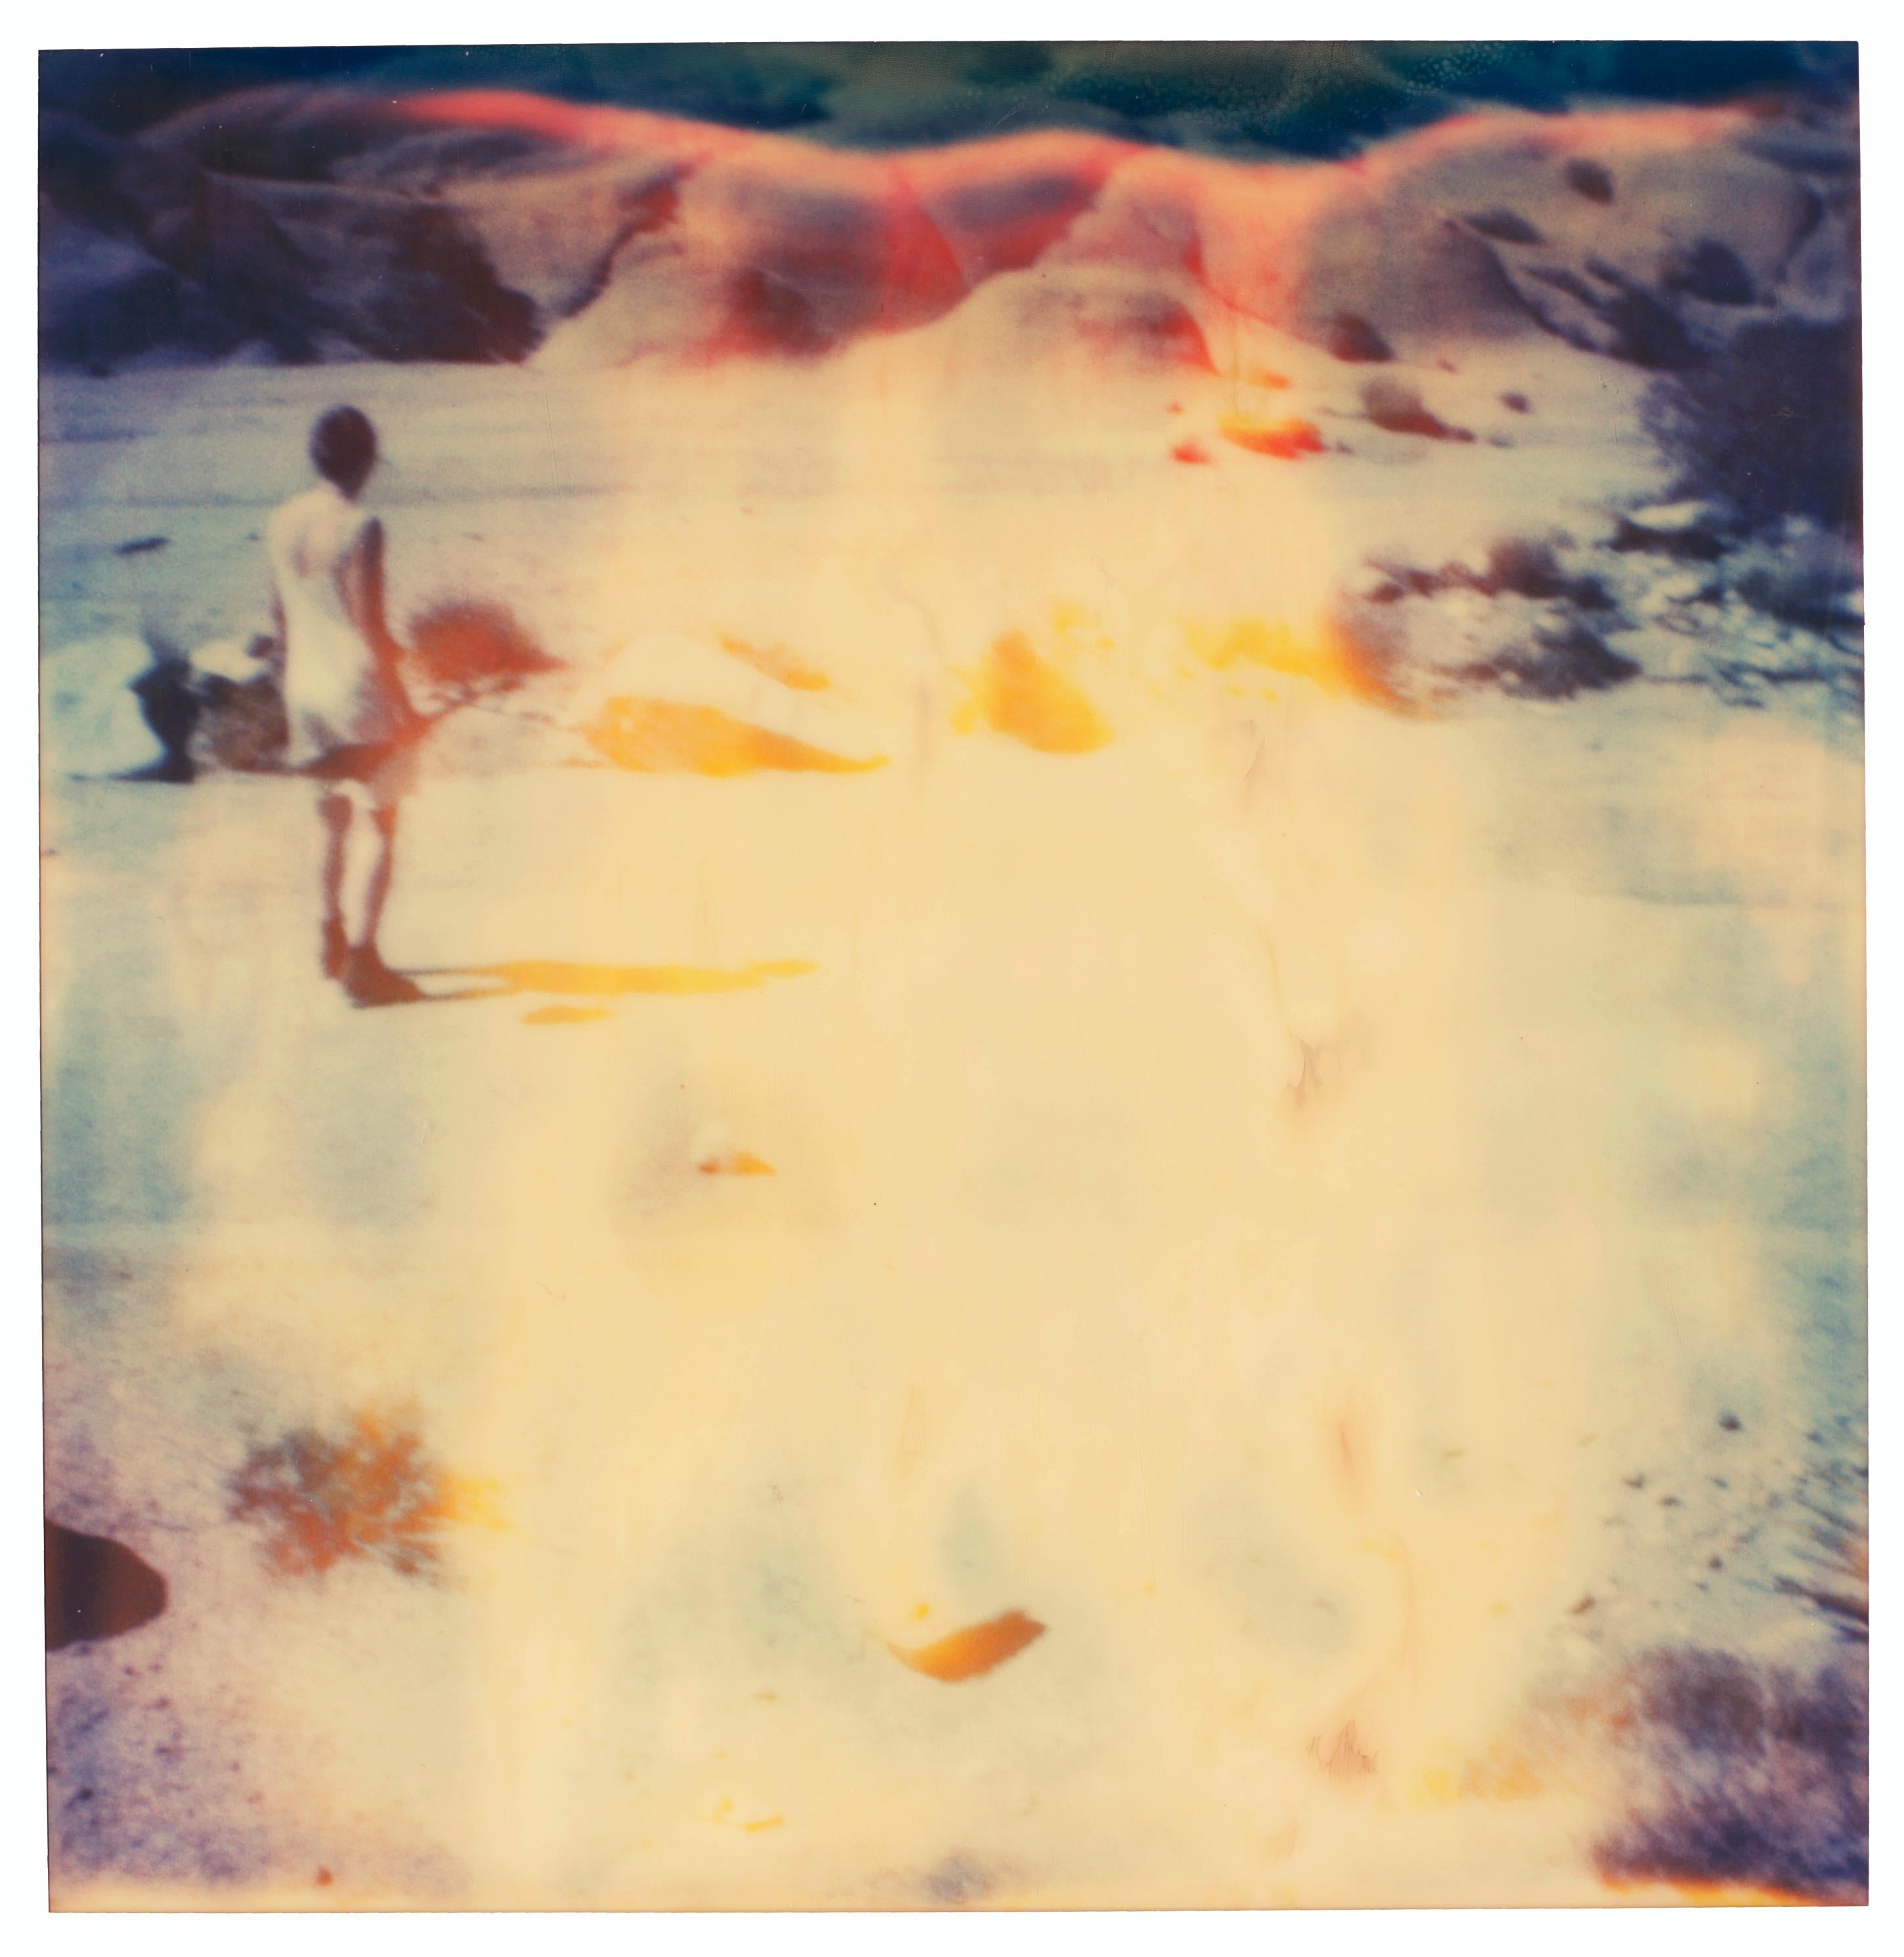 Buried - 8 pieces - Contemporary, Figurative, expired, Polaroid, analog For Sale 6